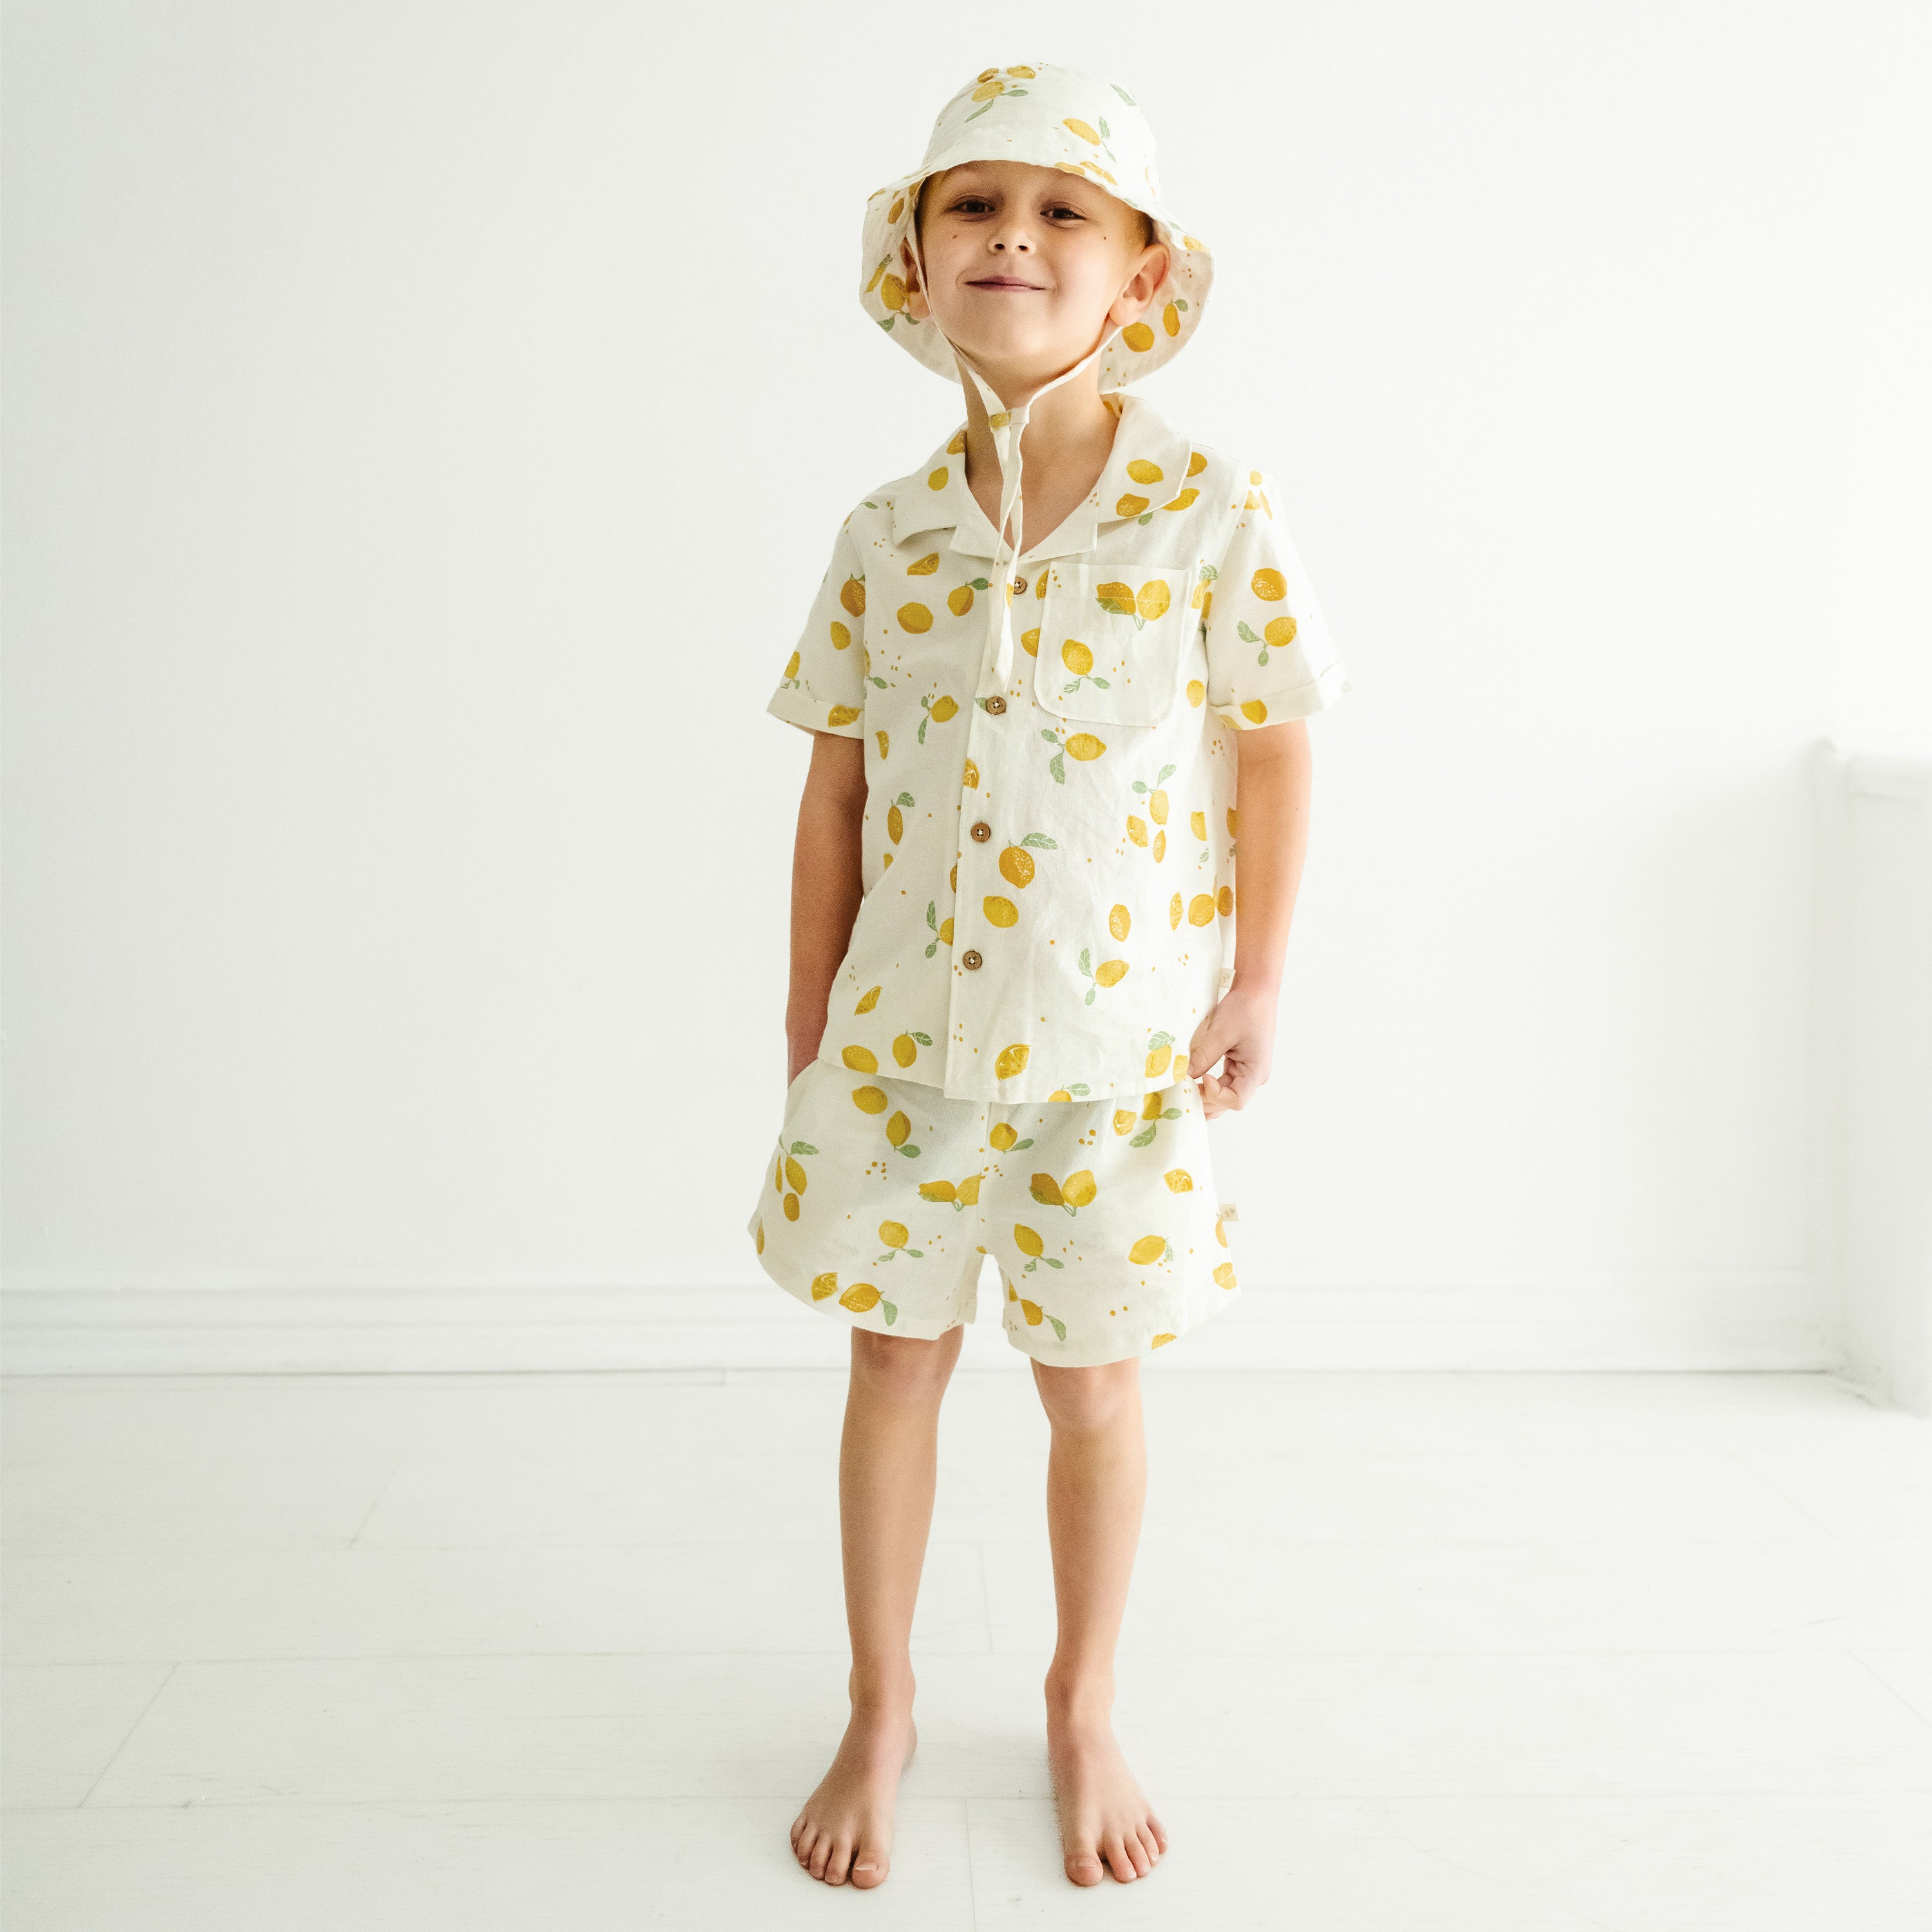 A young toddler stands barefoot in a light, airy room, wearing a Makemake Organics Organic Linen Shirt and Shorts Set adorned with lemon prints. The child looks directly at the camera with a subtle smile.